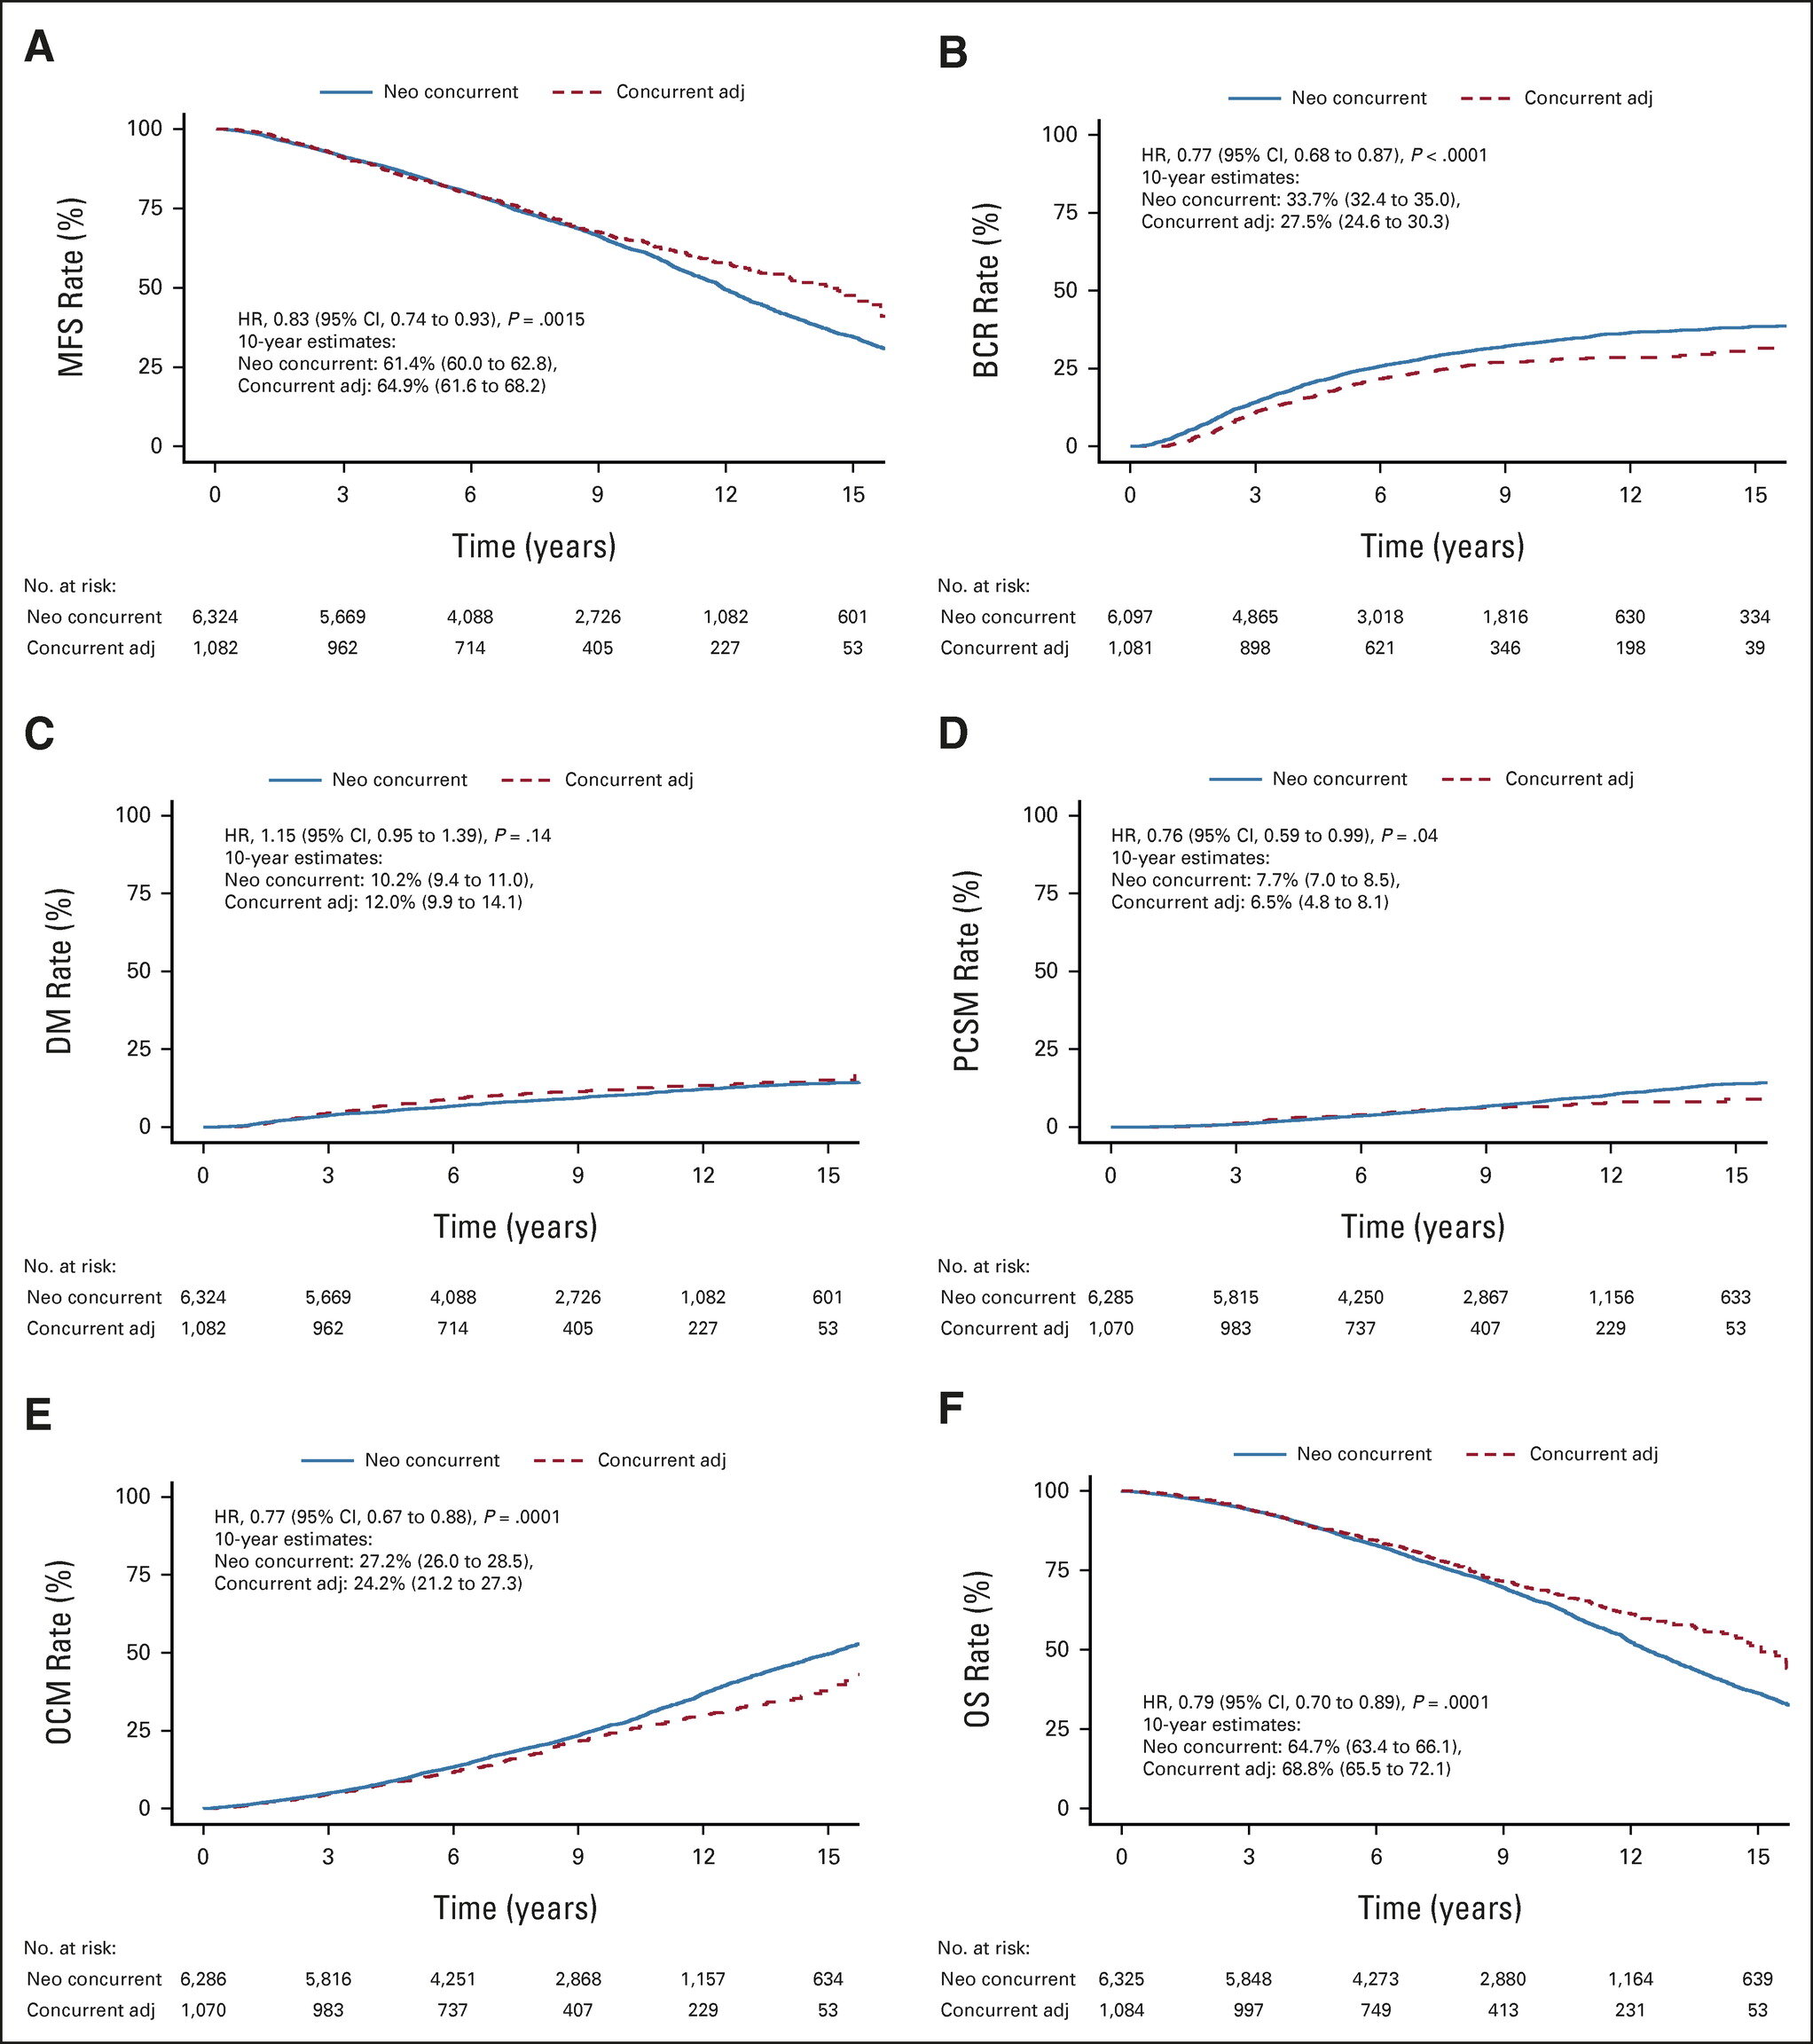 Timing Androgen Deprivation Therapy With Radiation Therapy Improves Outcomes In Localized 0140